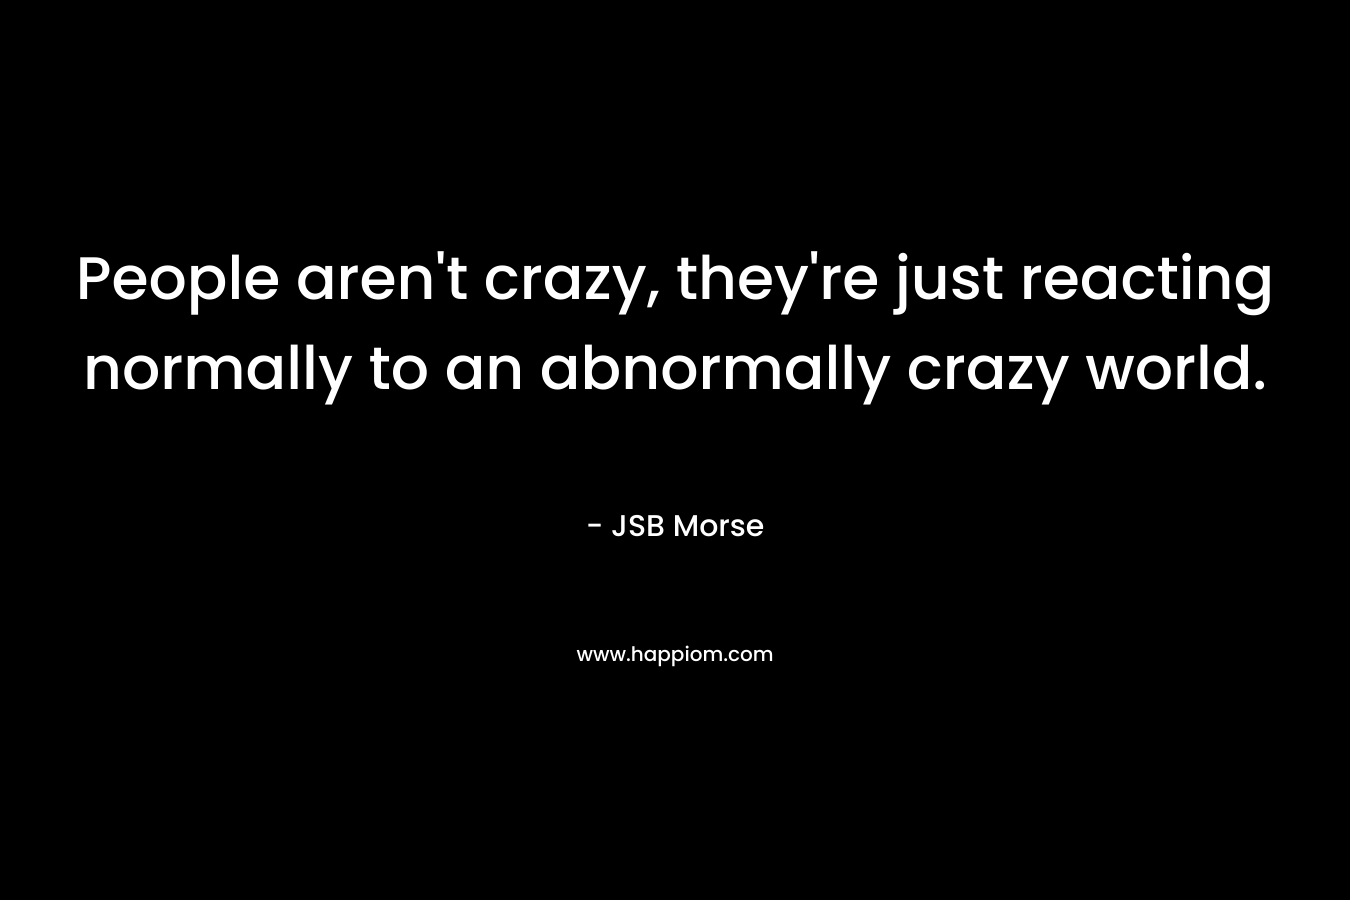 People aren’t crazy, they’re just reacting normally to an abnormally crazy world. – JSB Morse